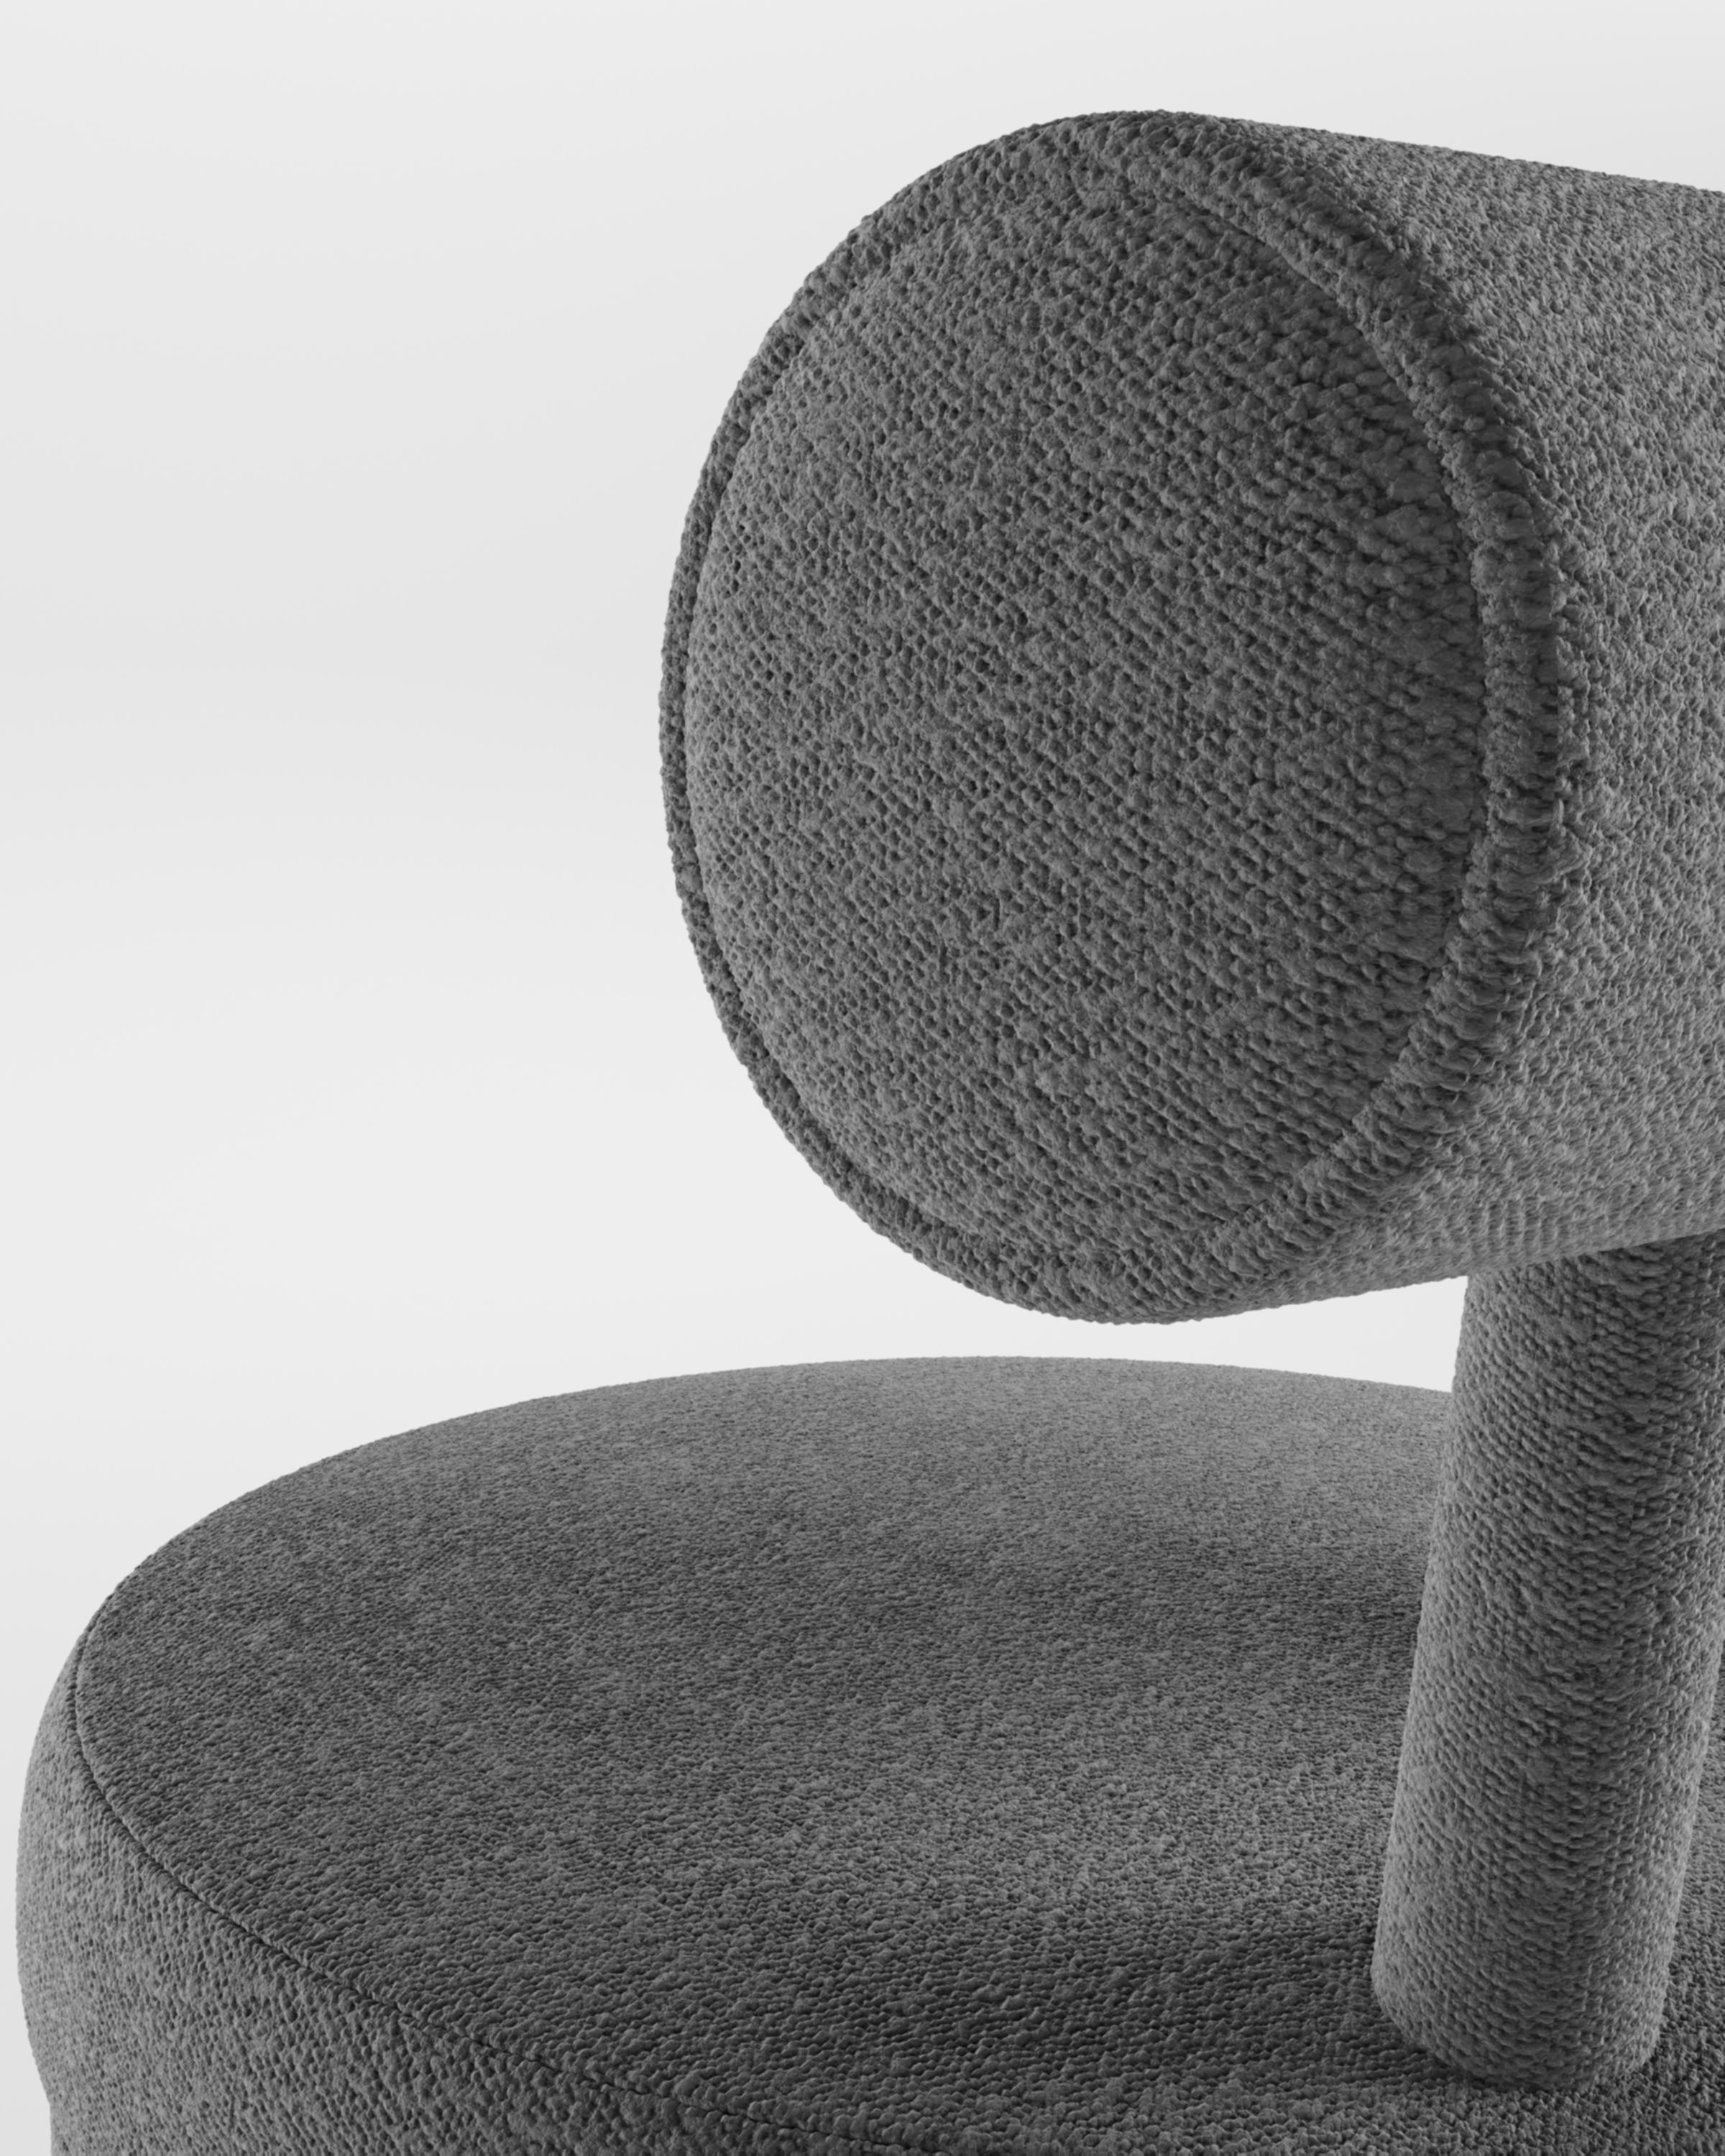 Contemporary Modern Moca bar chair in fabric by Studio Rig for Collector Studio

A chair that mixes both modern and classical design approaches.
Designed to hug the body, durable and solid chair features a body structure produced in solid